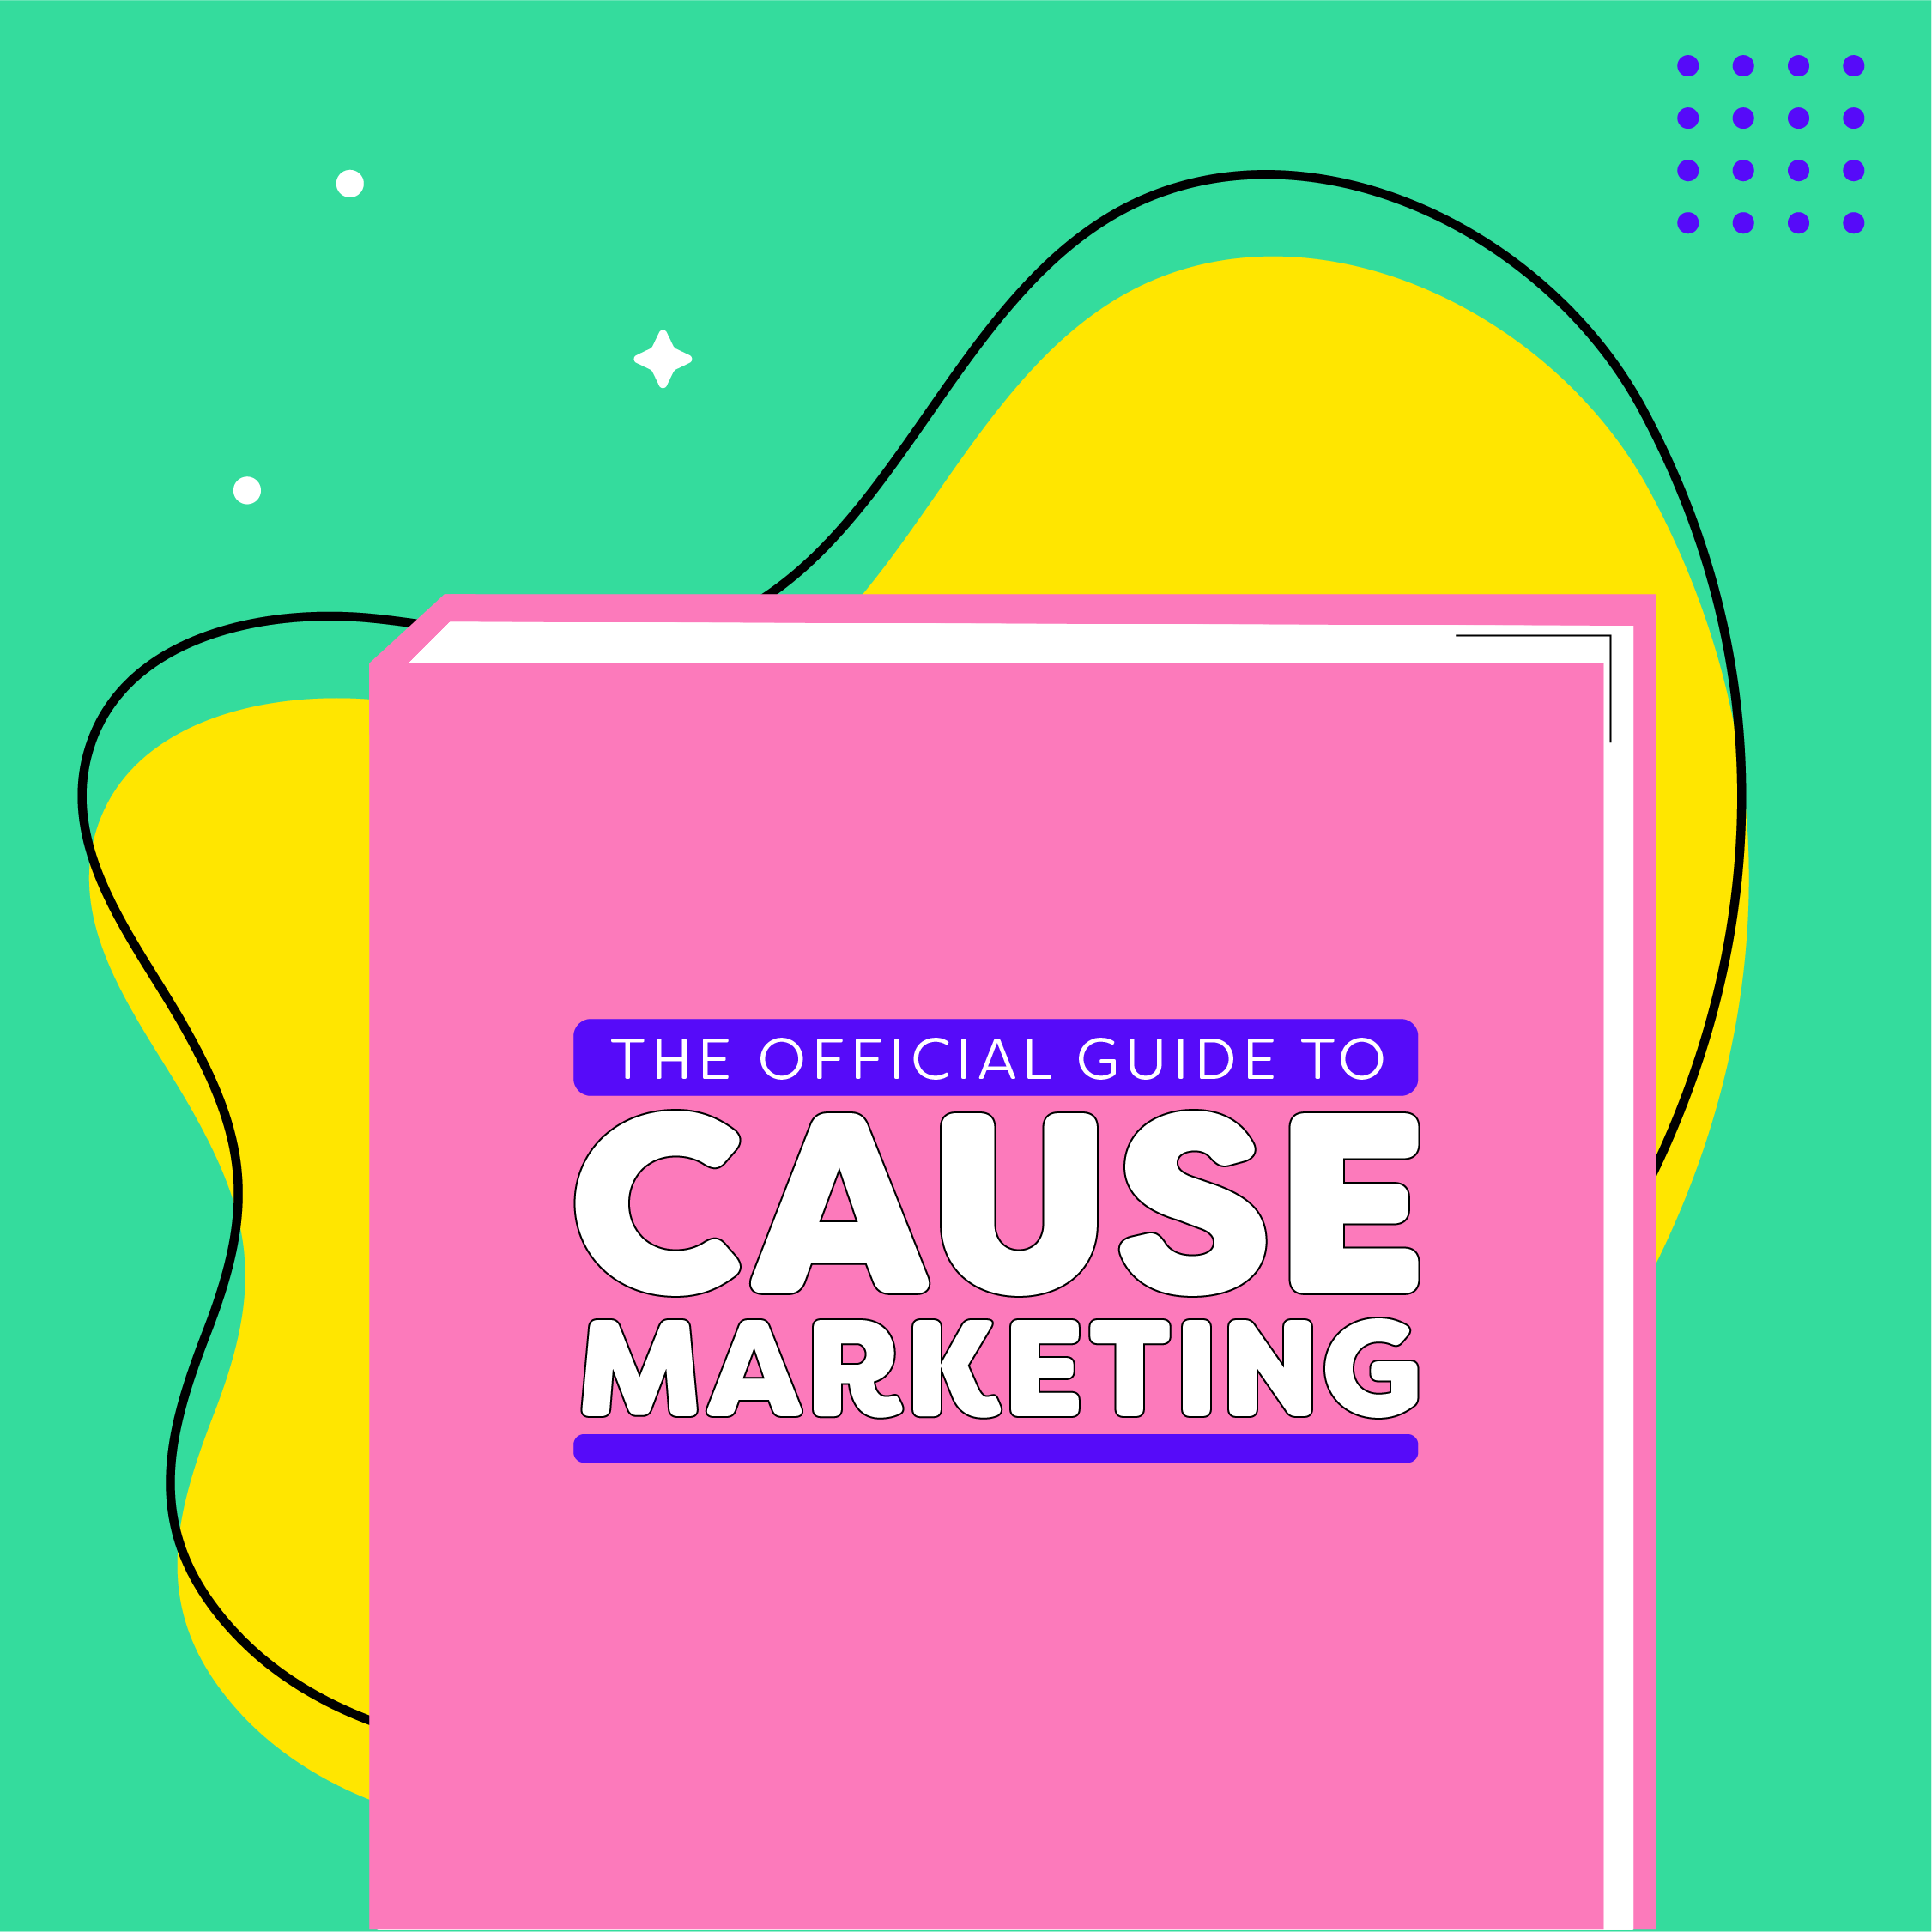 The Official Guide to Cause Marketing